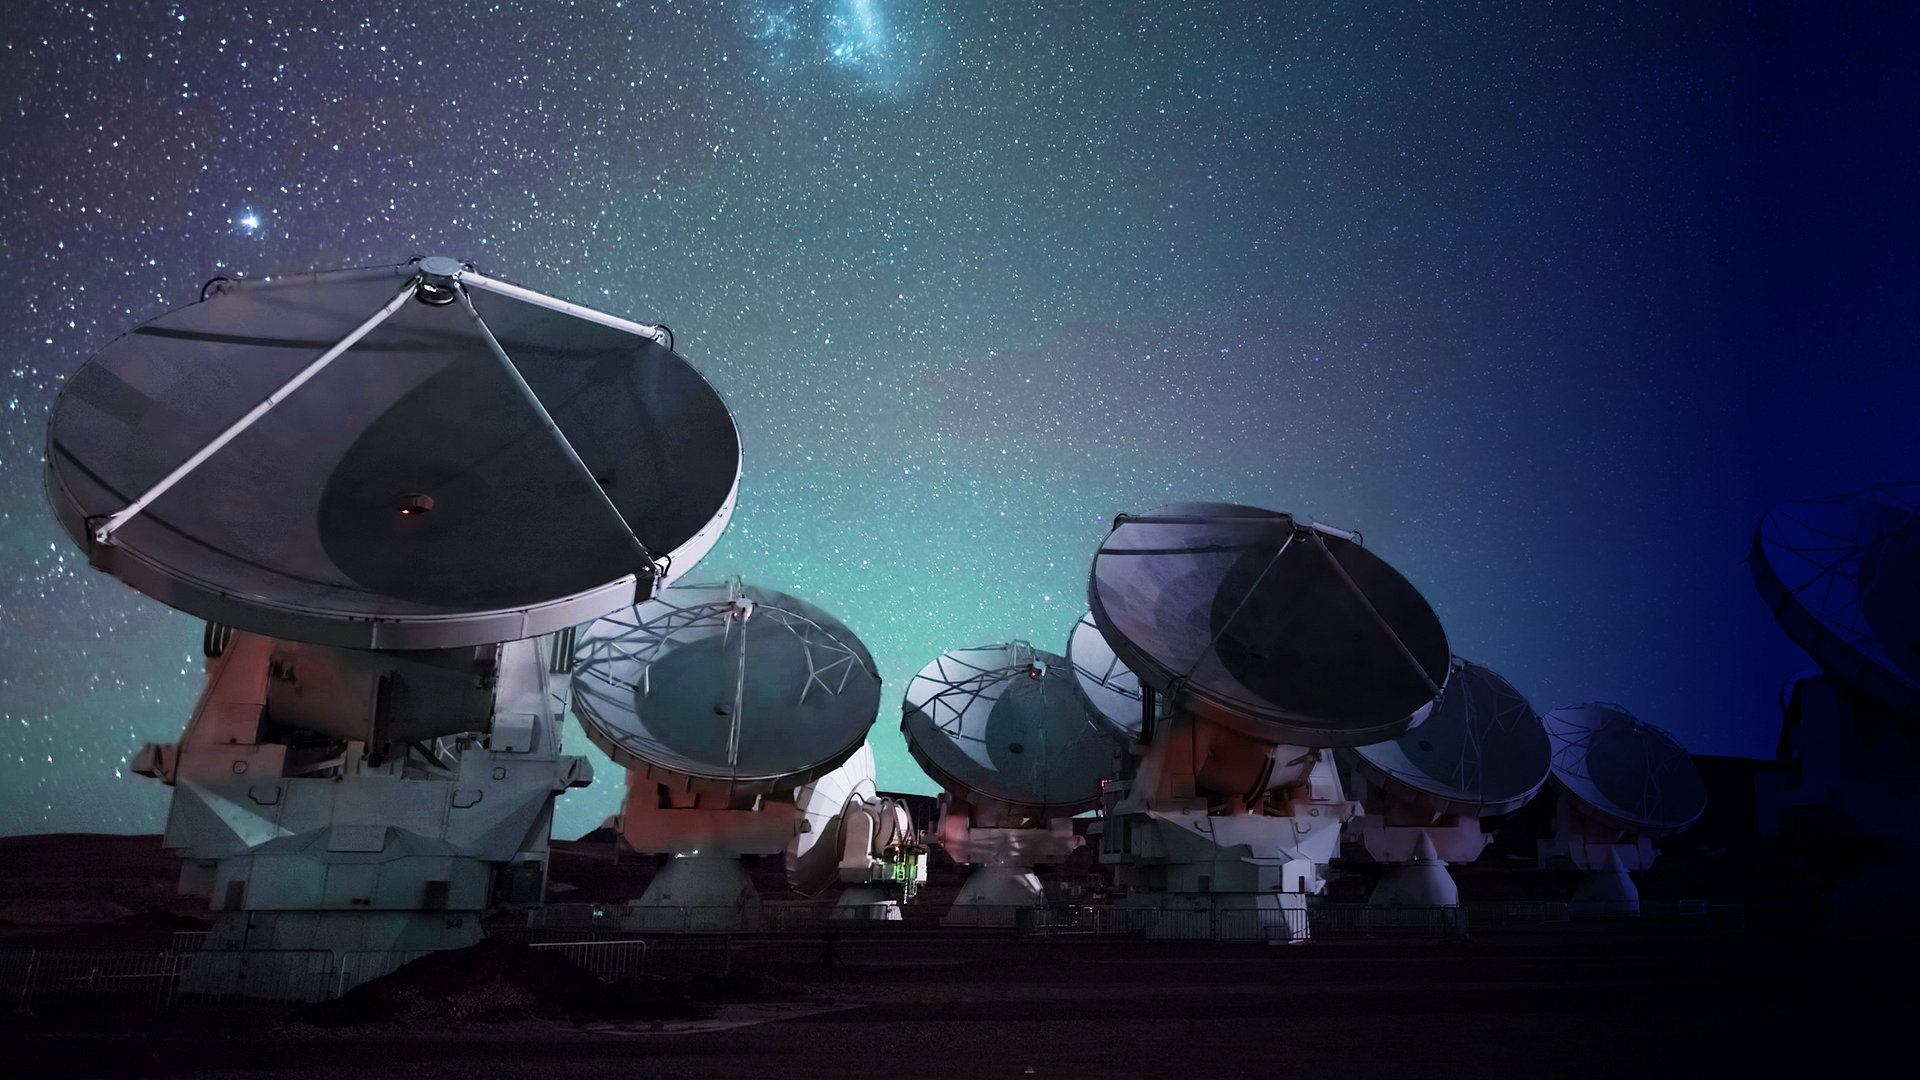 The World's Most Powerful Telescopes